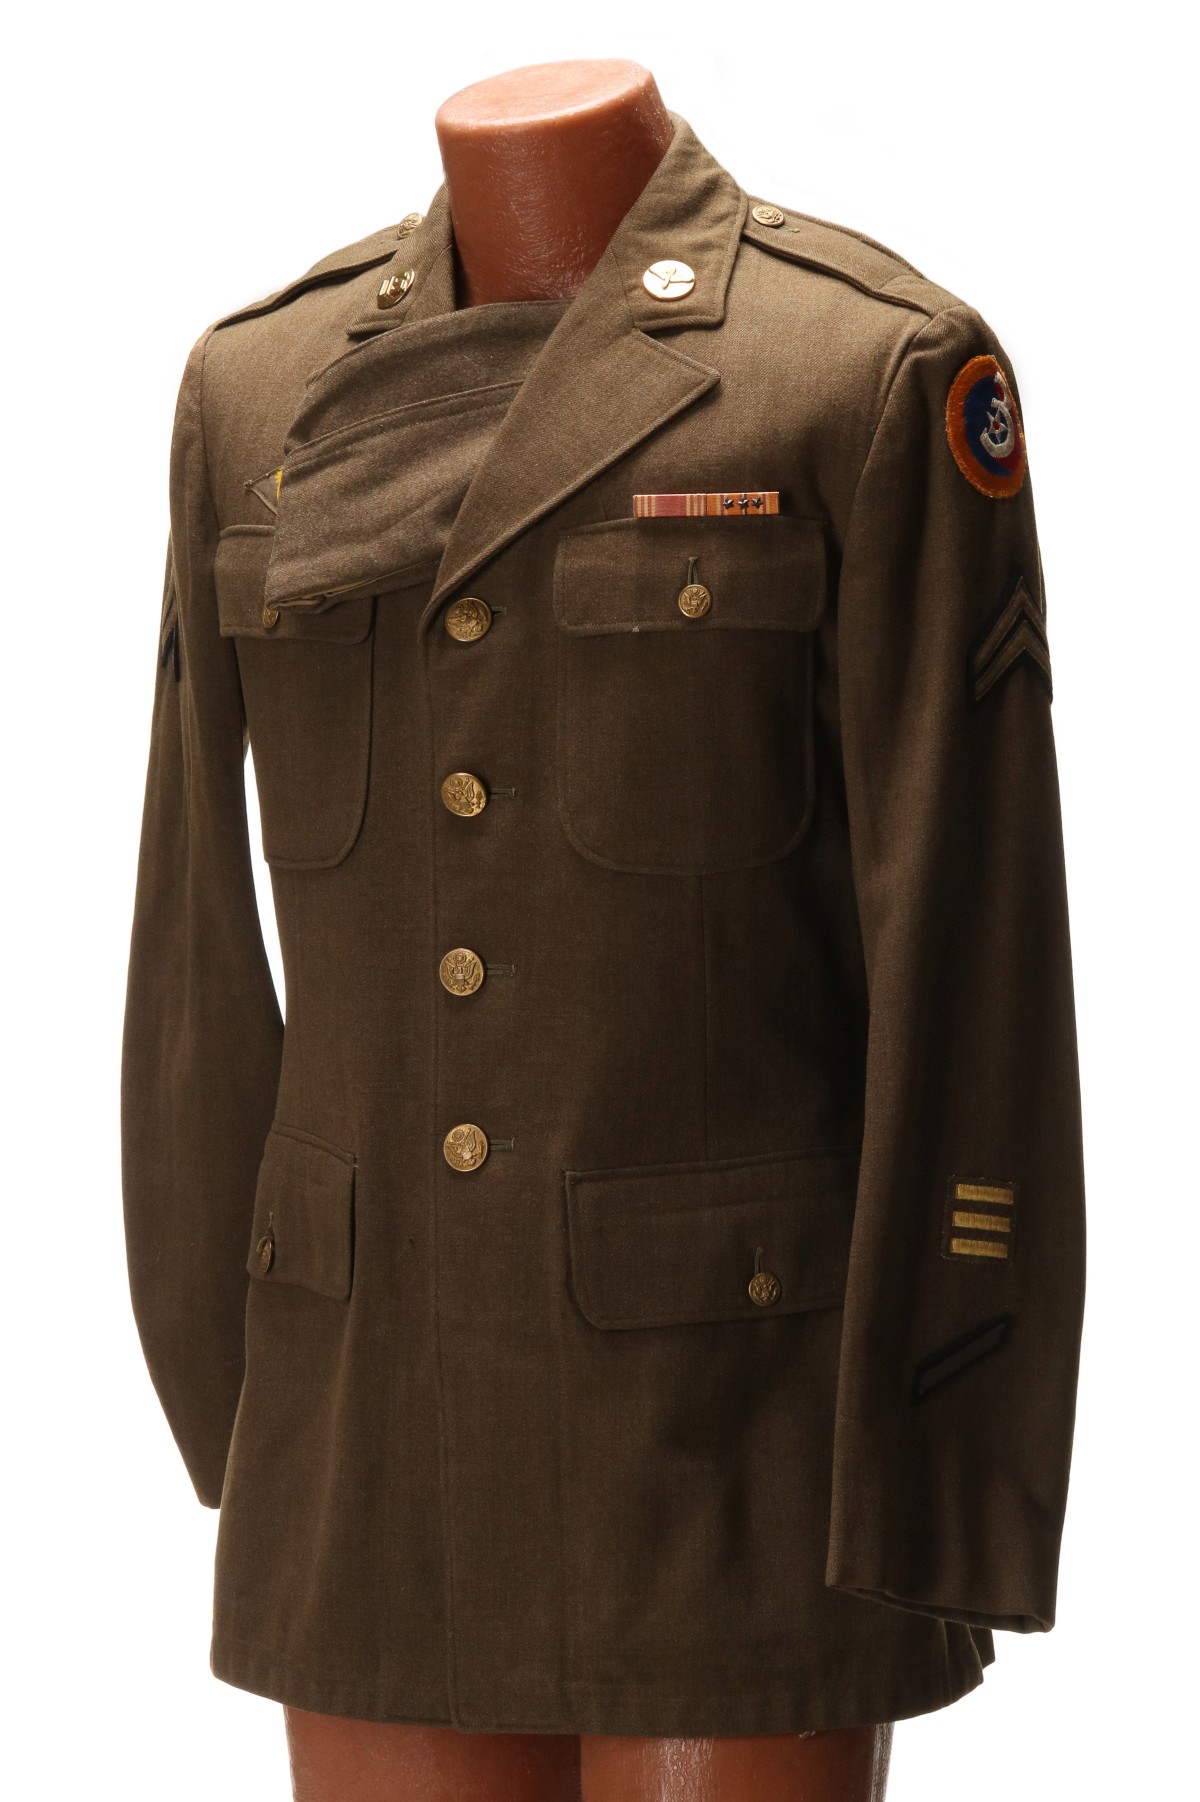 AAF UNIFORM ALONG WITH NAMED AIRBORNE COMMAND GROUP